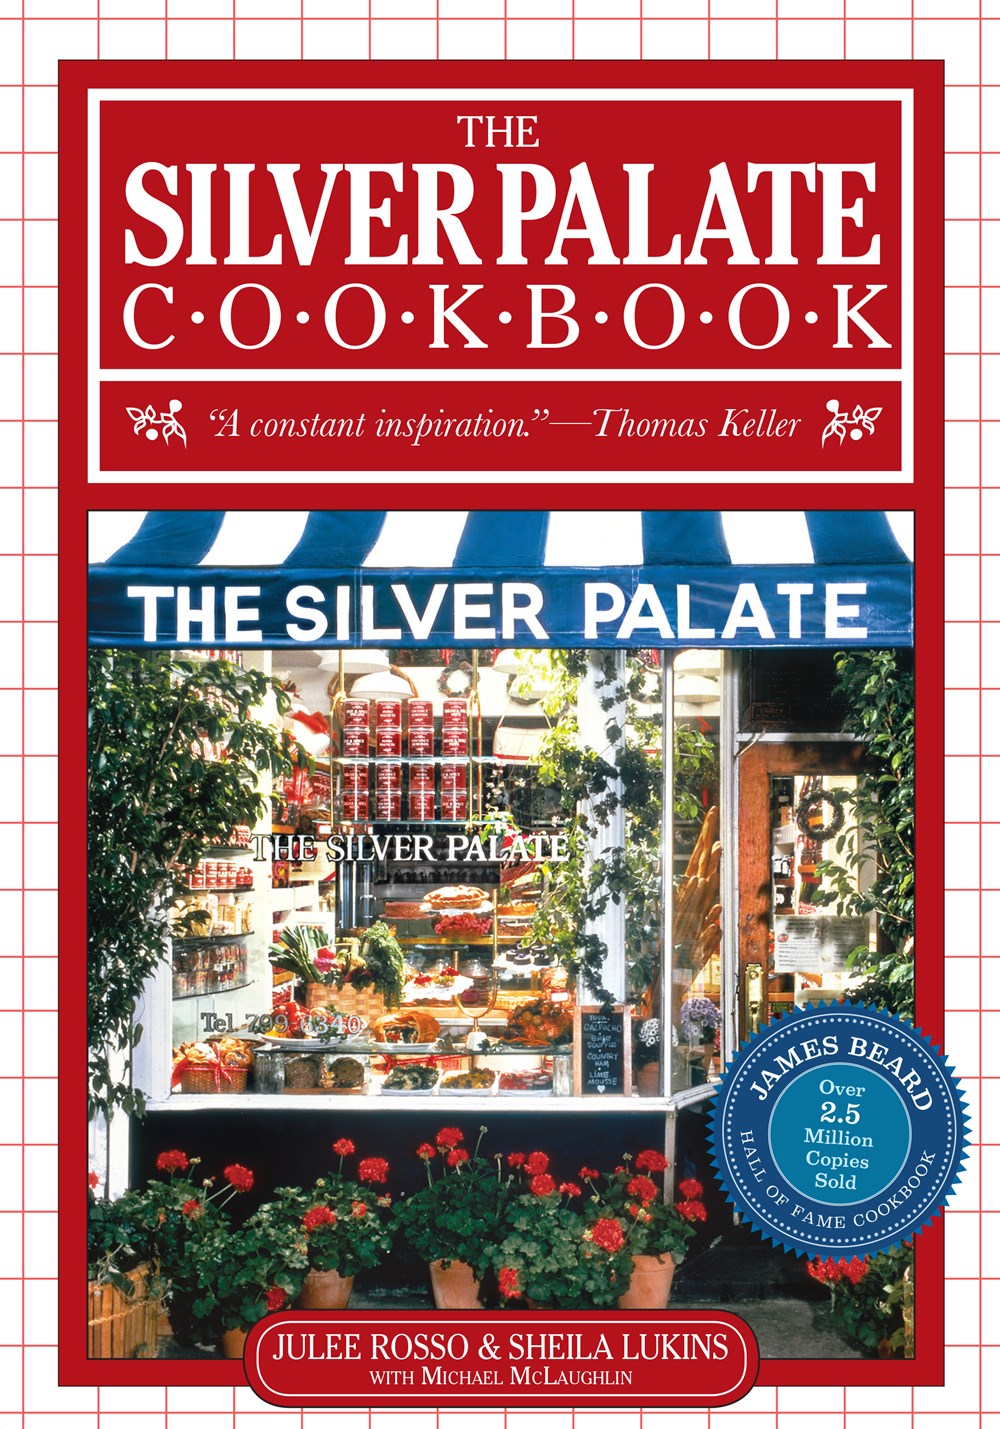 The Silver Palate Cookbook by Sheila Lukins & Julee Rosso